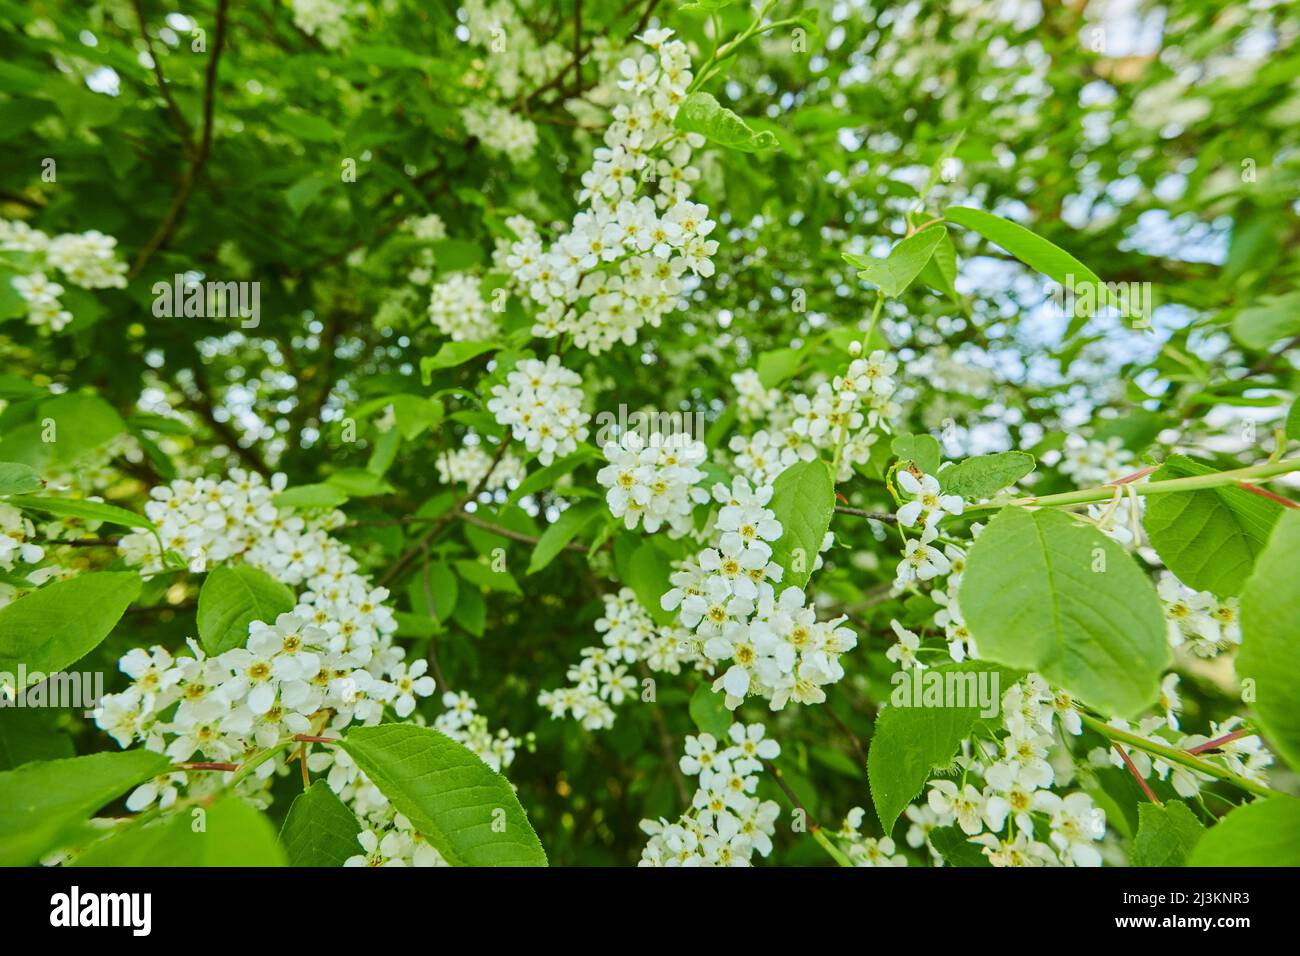 Close-up of flower blossoms and leaves of the bird cherry tree (Prunus padus); Bavaria, Germany Stock Photo